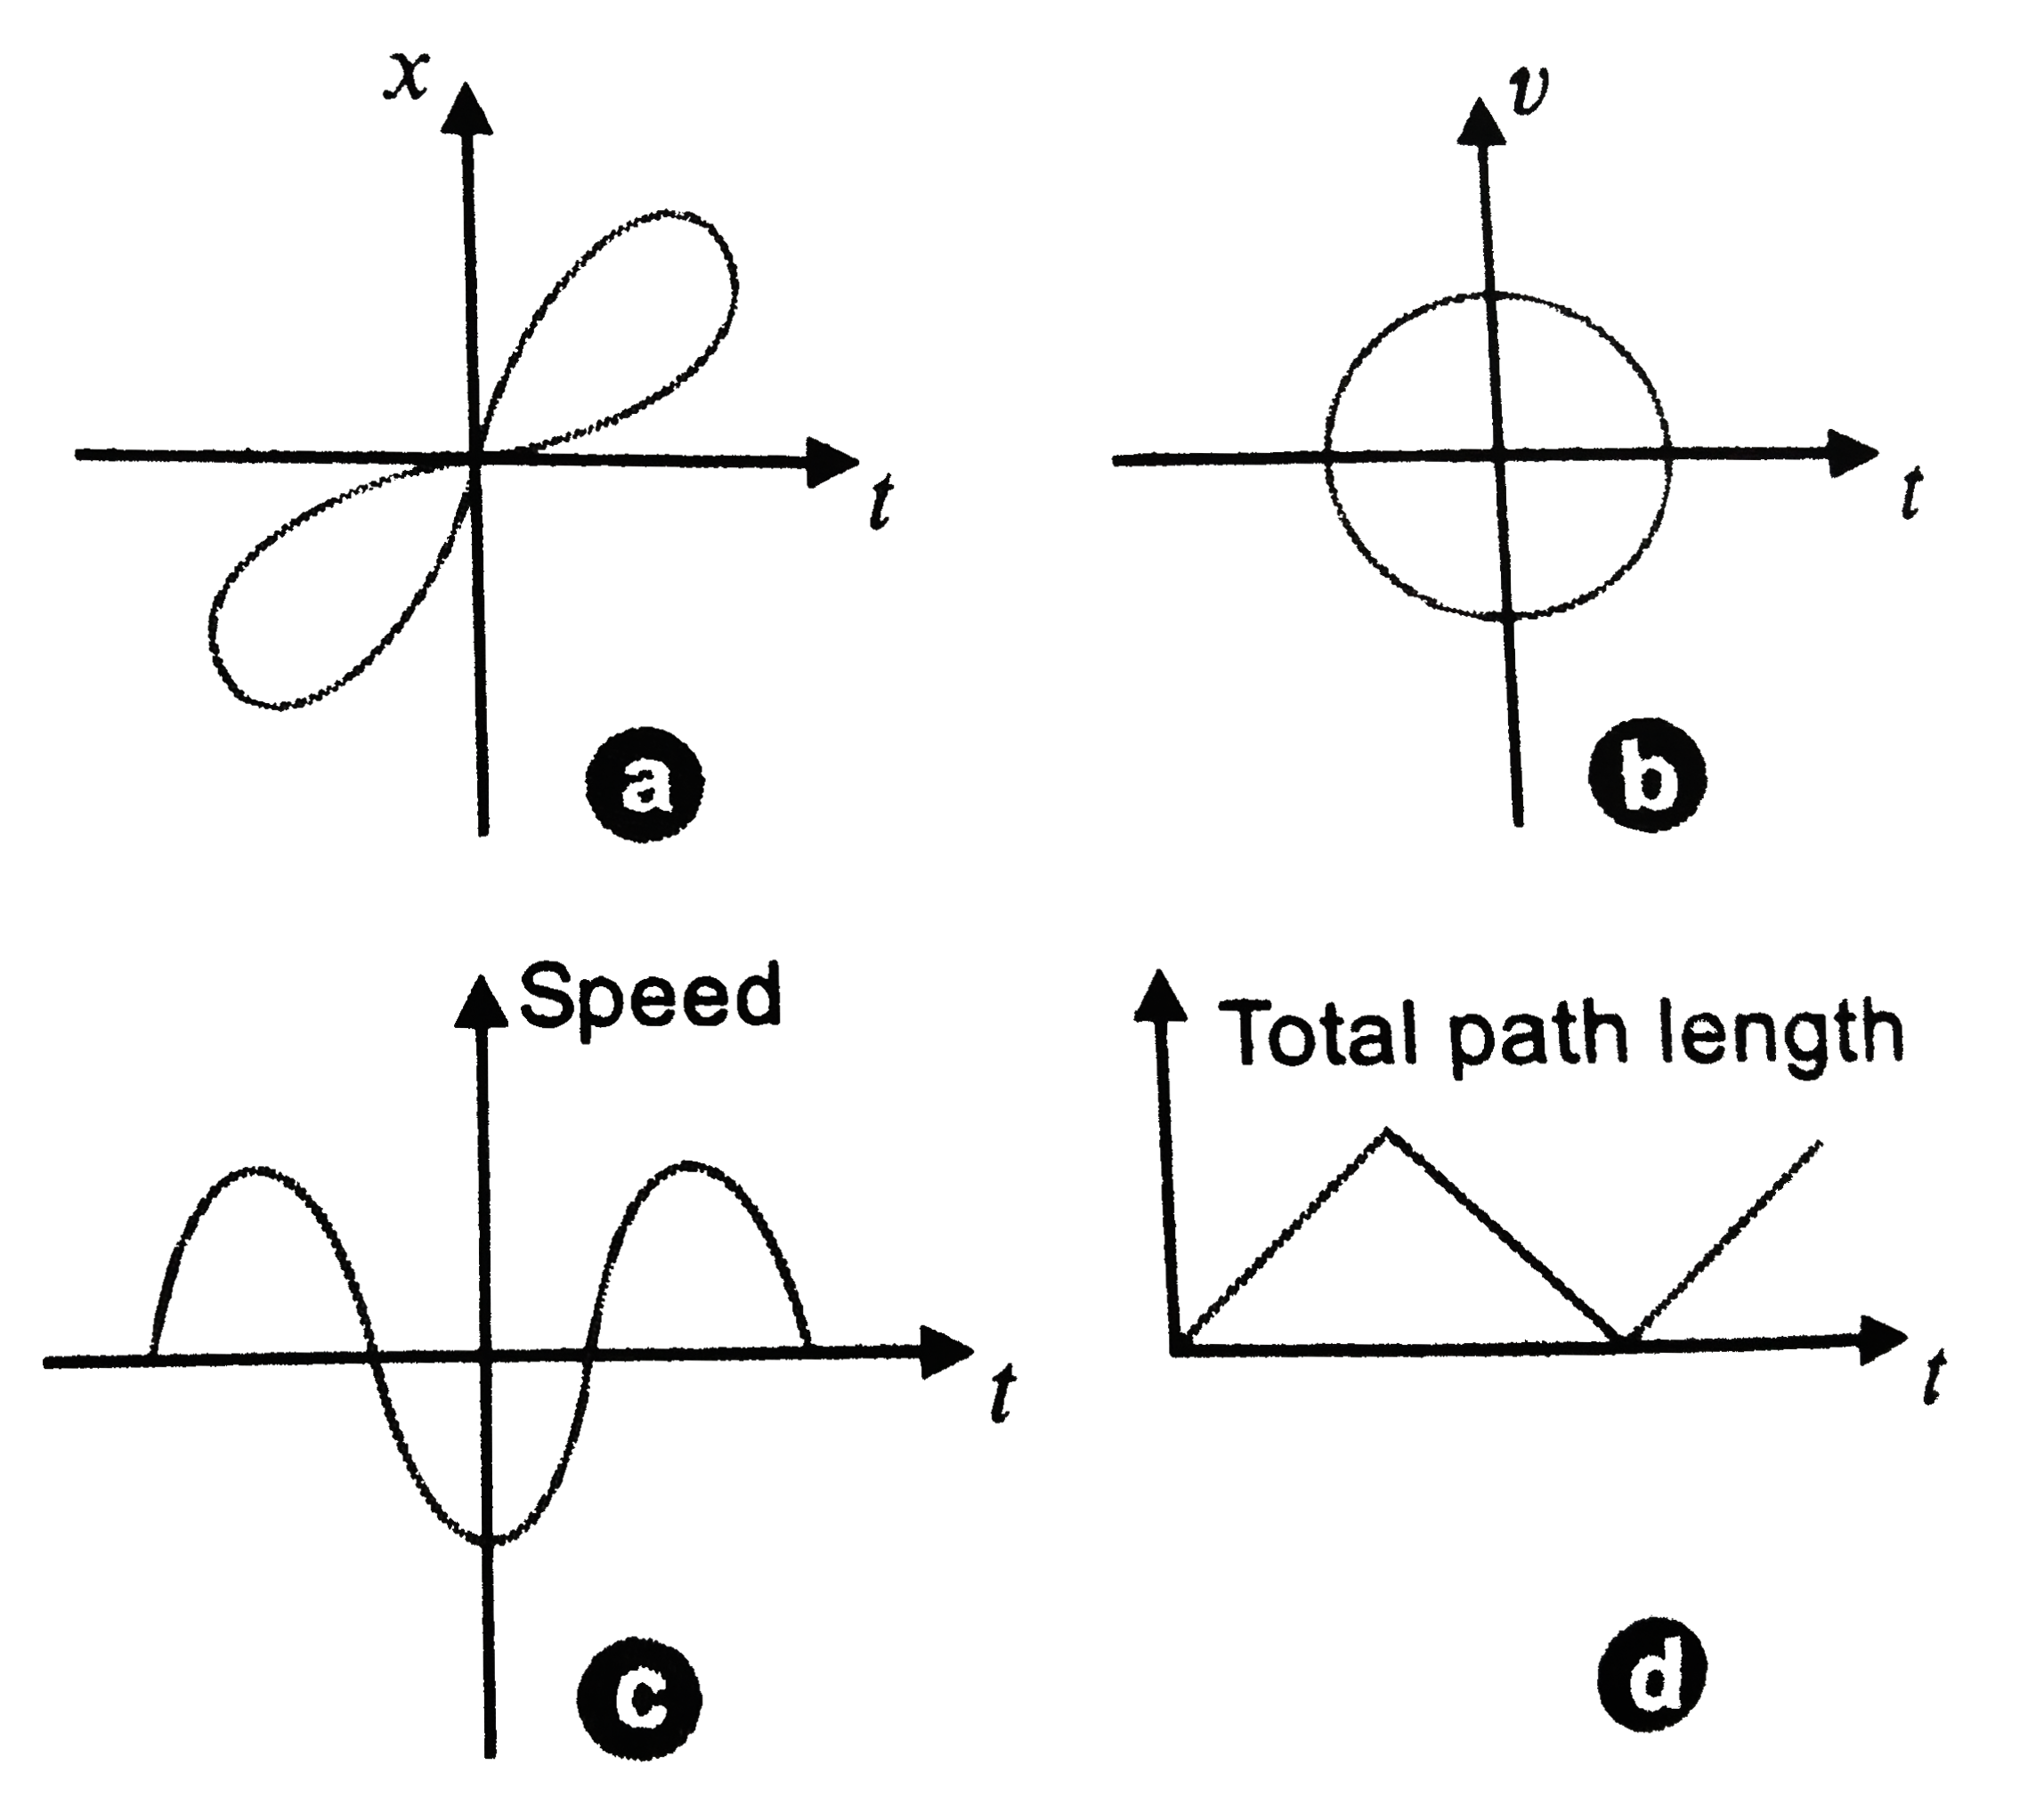 Look at the graphs (a) to (d) carefully and state, with reasons, with of these cannot possibly represent one dimensional motion of a particle.